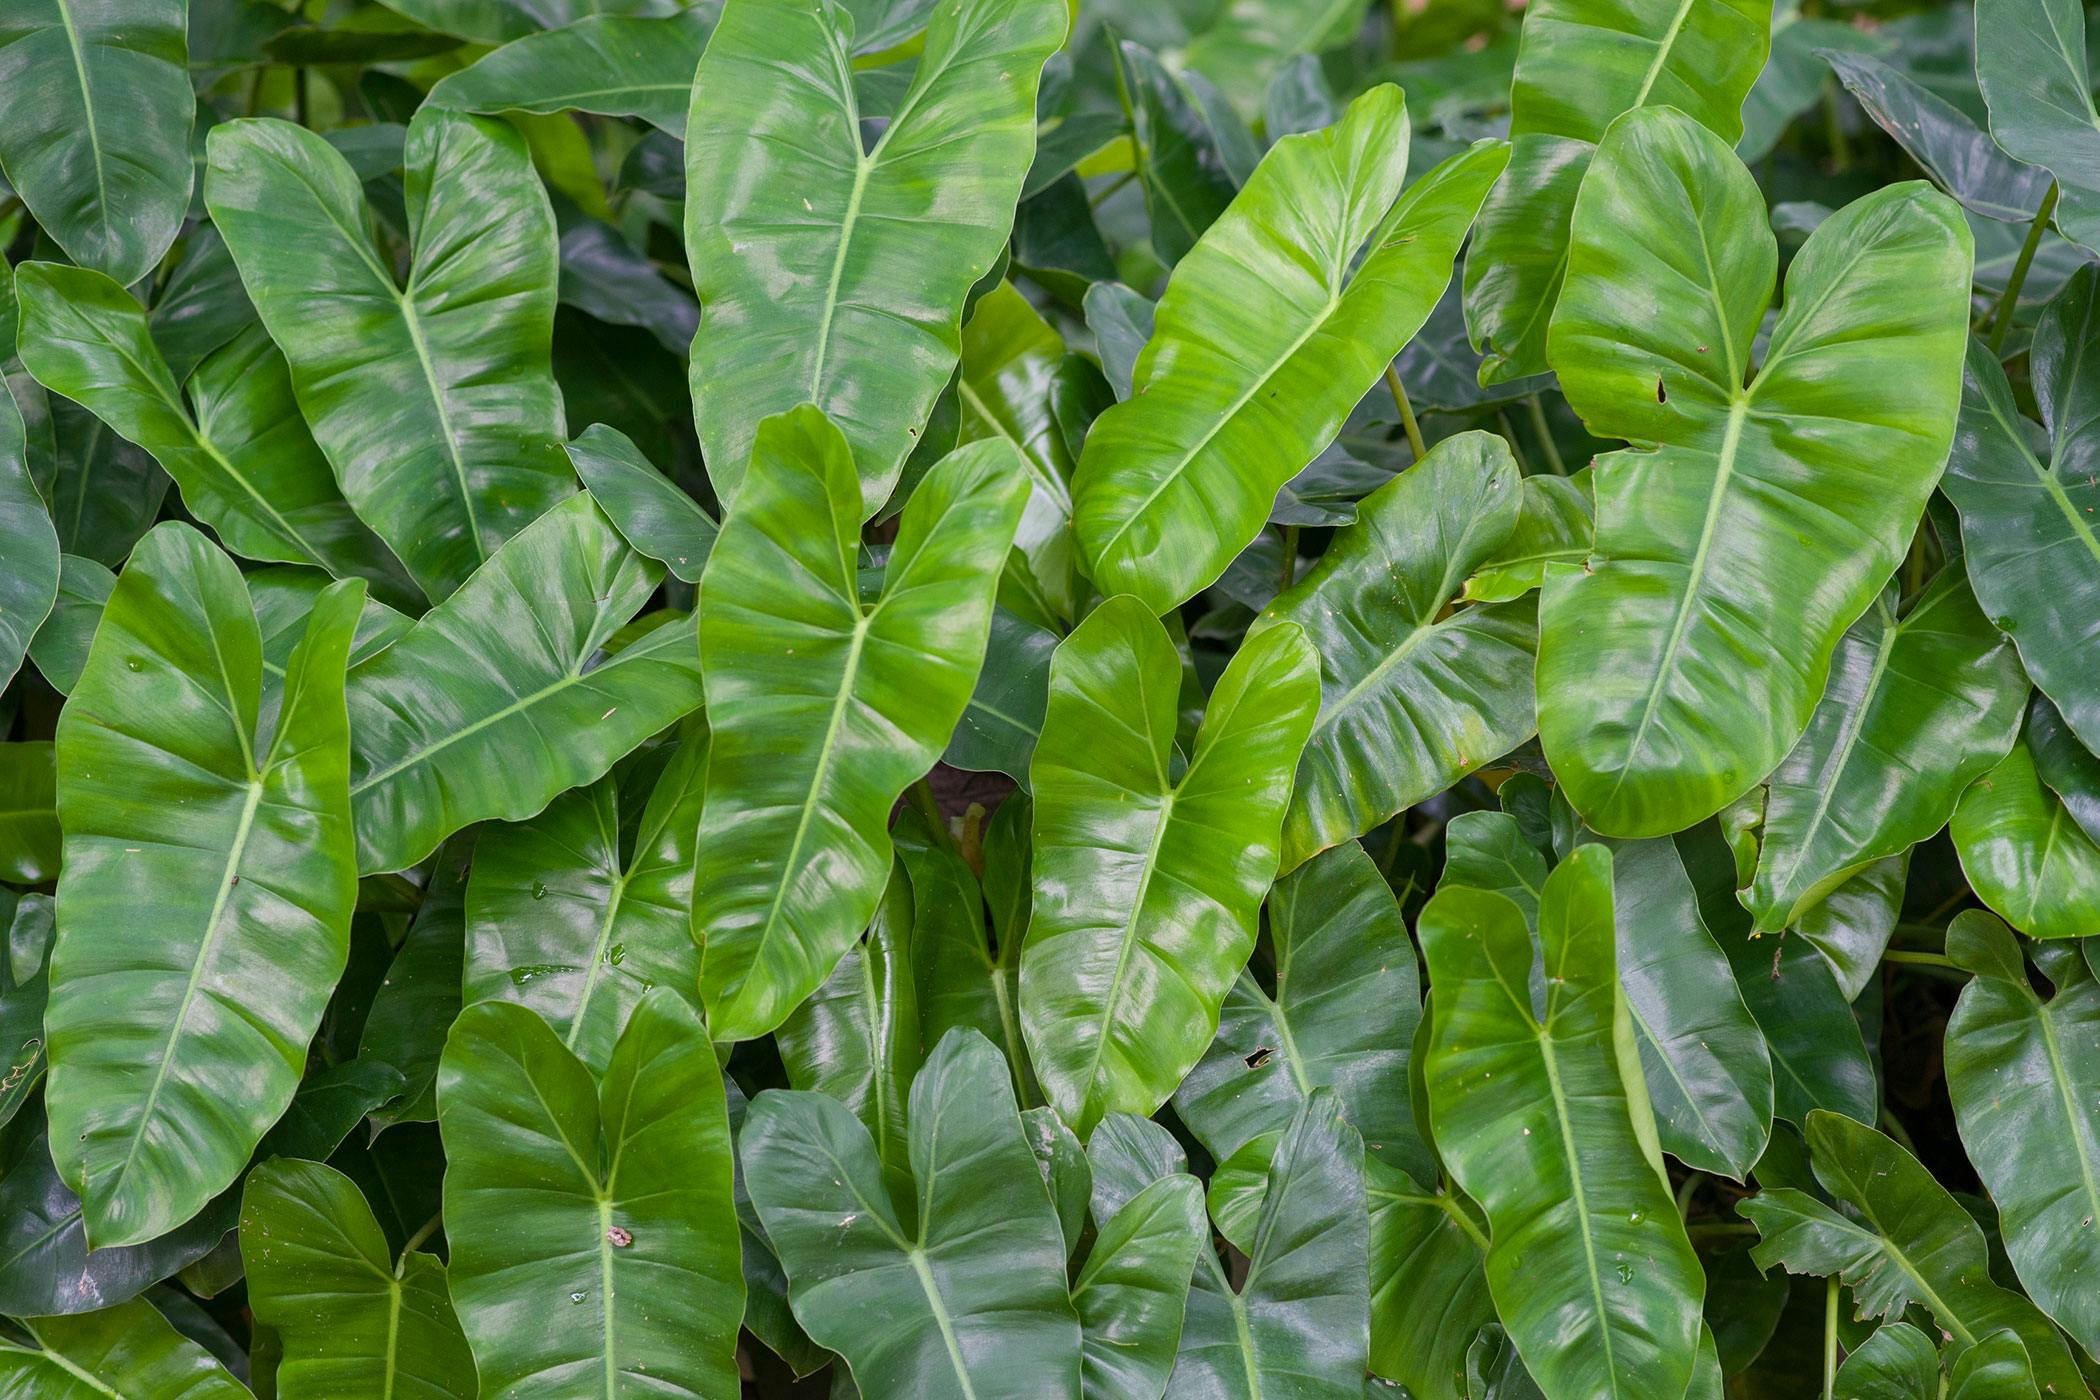 philodendron leaf fiddle dogs poisoning toxic plant dog succulents royalty pets non green garden dreamstime